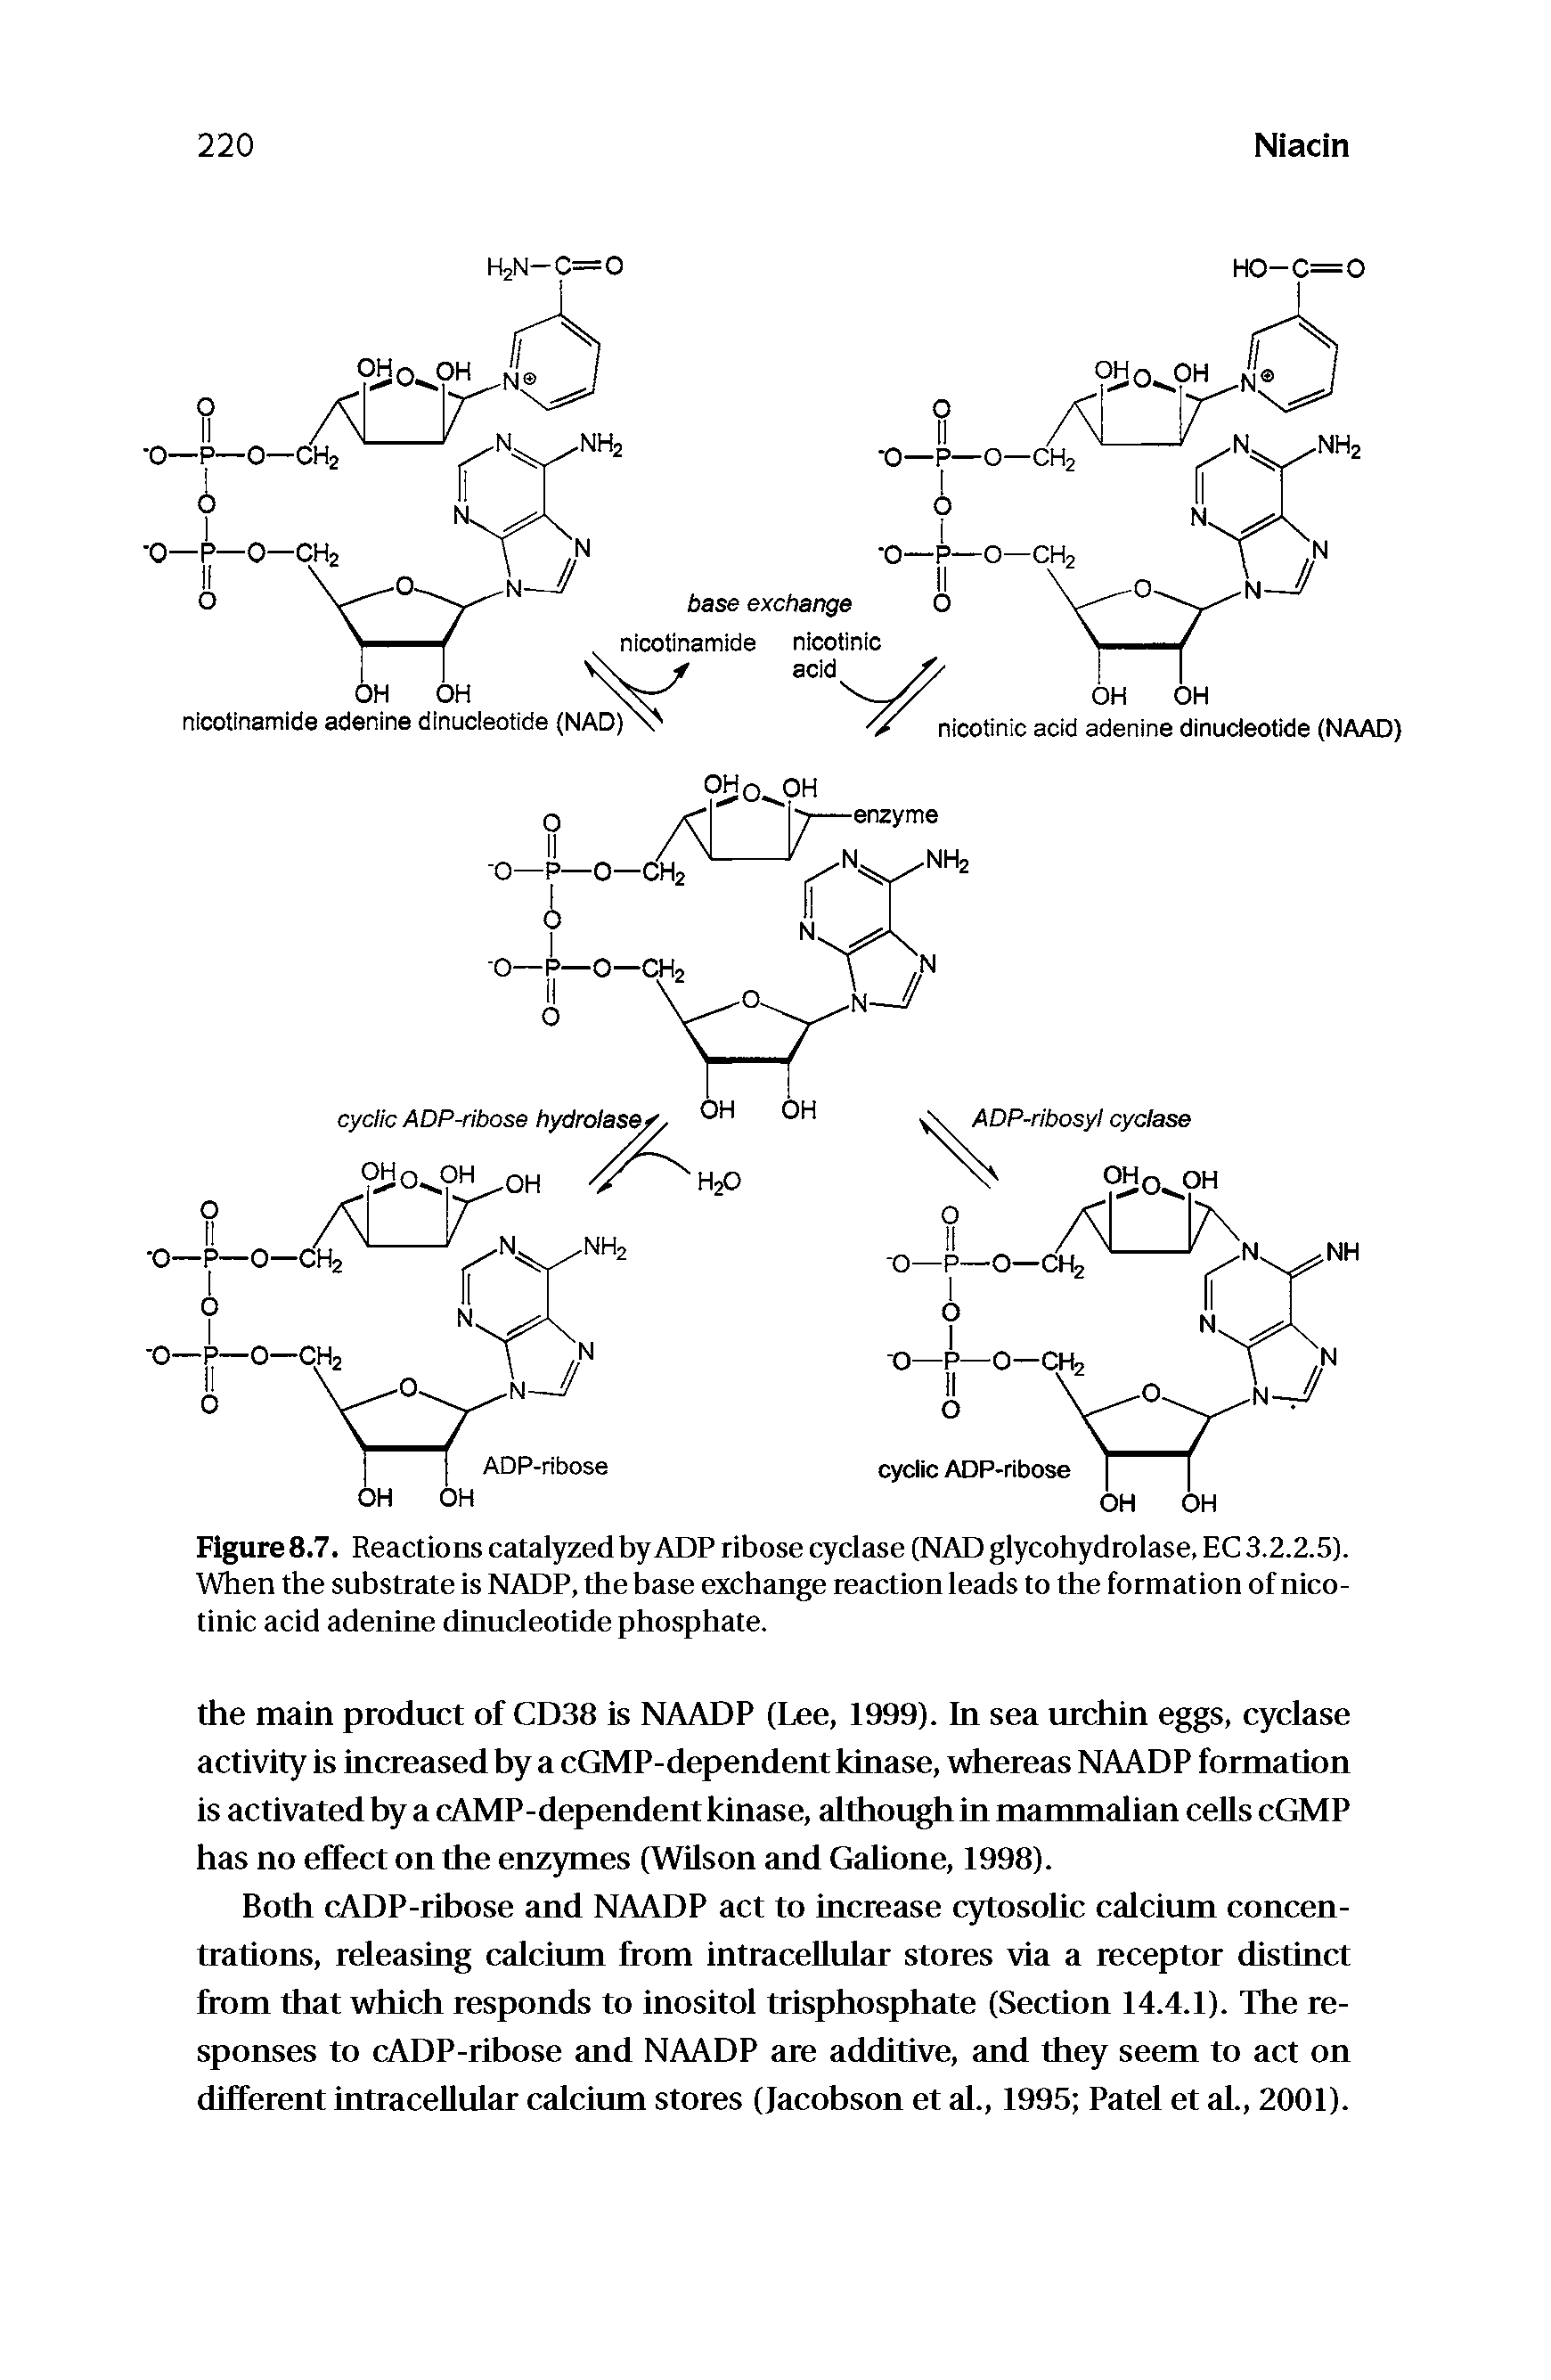 Figure 8.7. Reactions catalyzed byADP ribose cyclase (NAD glycohydrolase, EC 3.2.2.5). When the substrate is NADP, the base exchange reaction leads to the formation of nicotinic acid adenine dinucleotide phosphate.